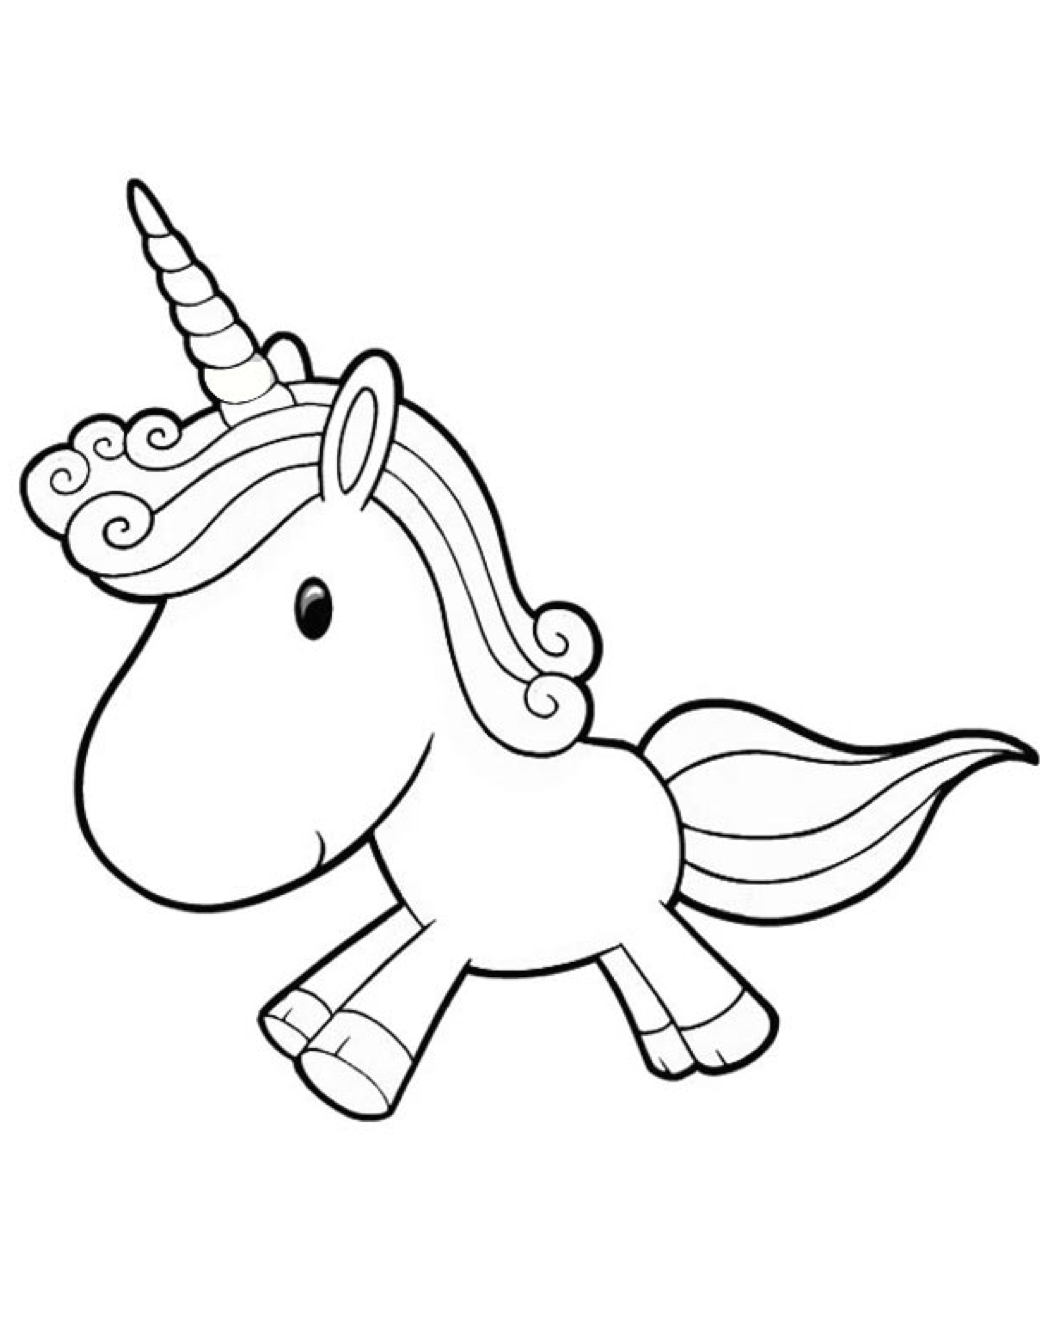 Unicorn Color Page Cartoon Unicorn Coloring Page Coloring Page Book For Kids